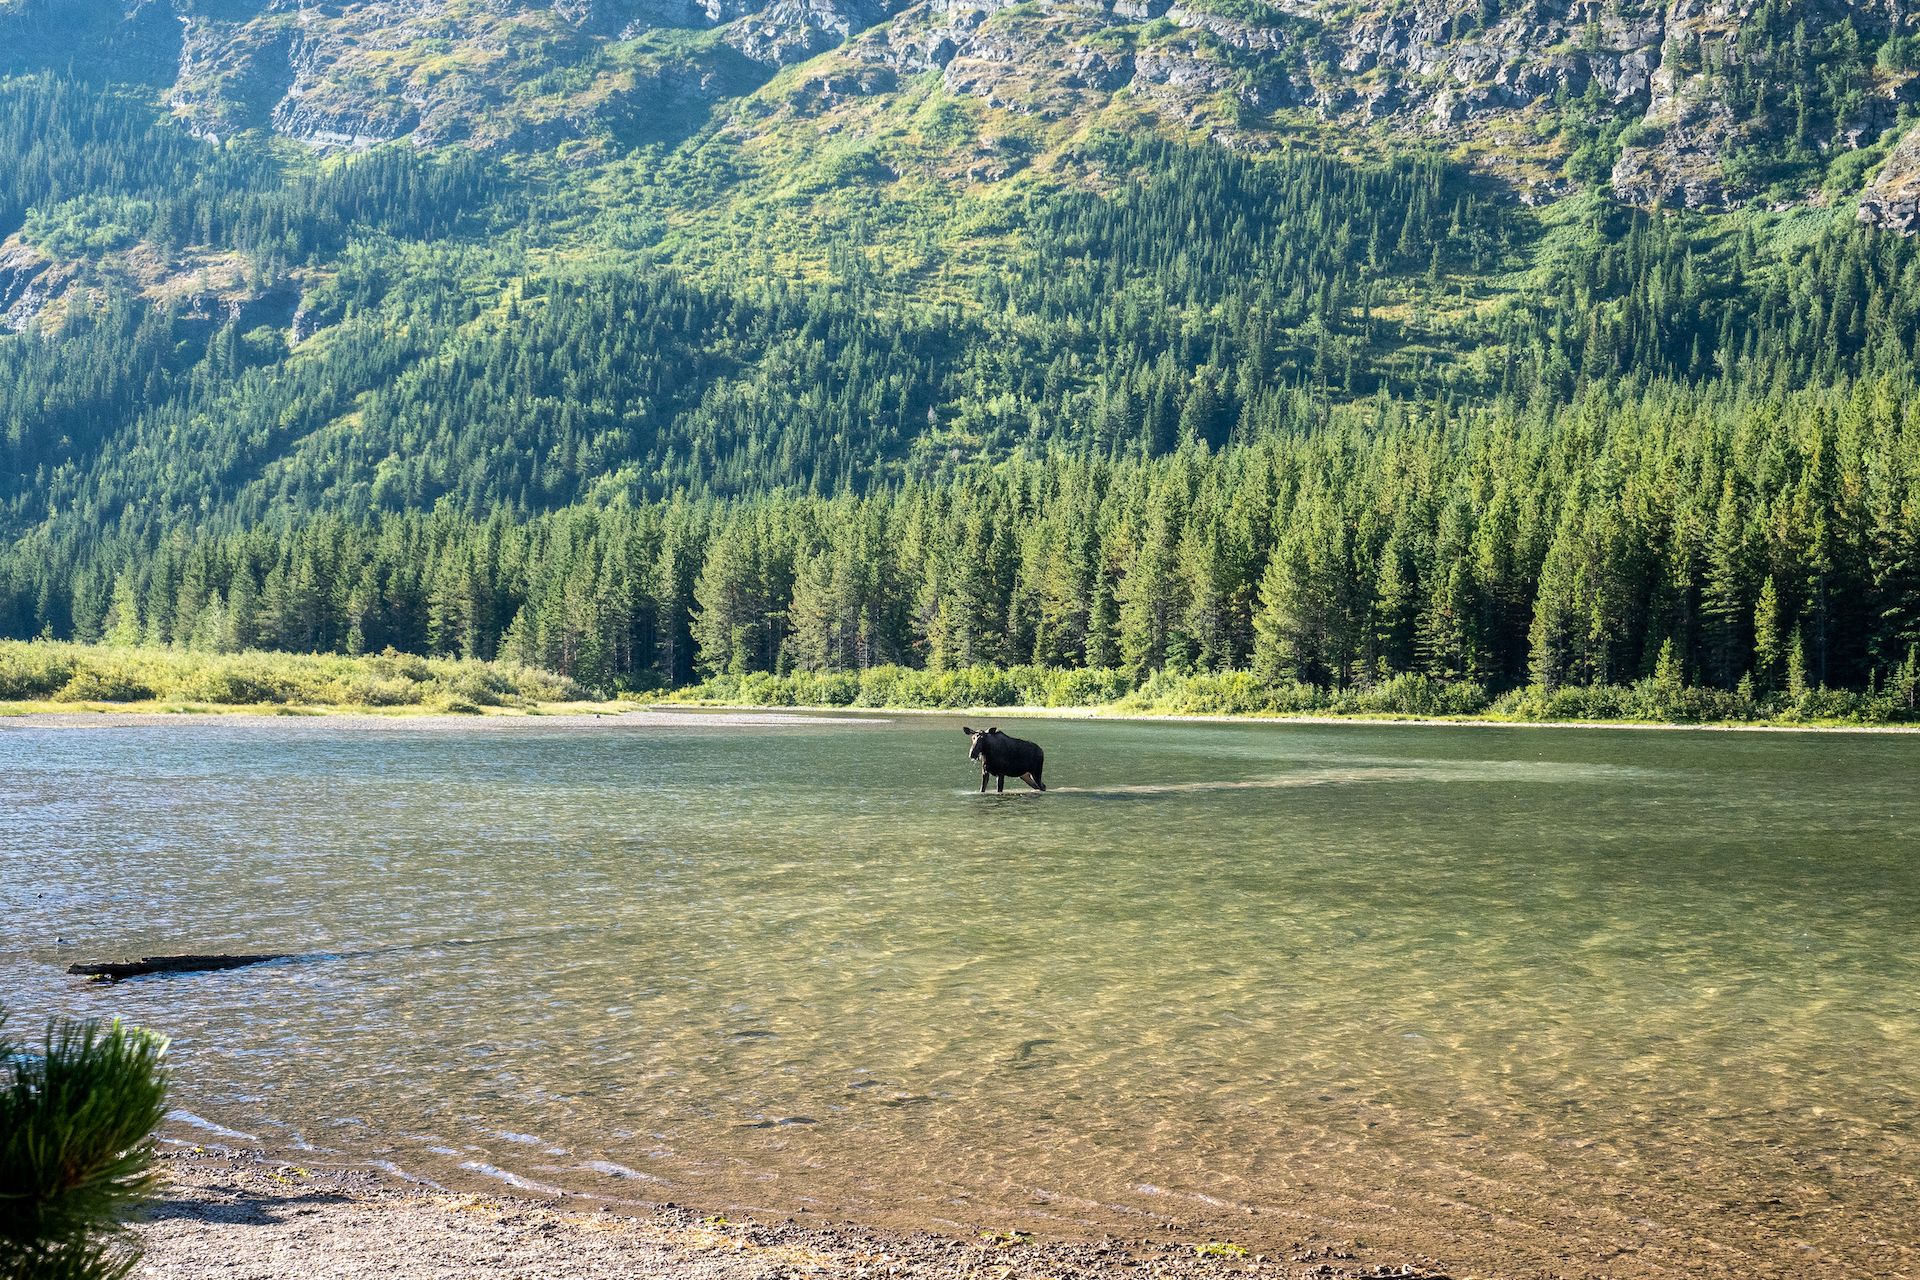 We saw a moose eating plants in a shallow lake